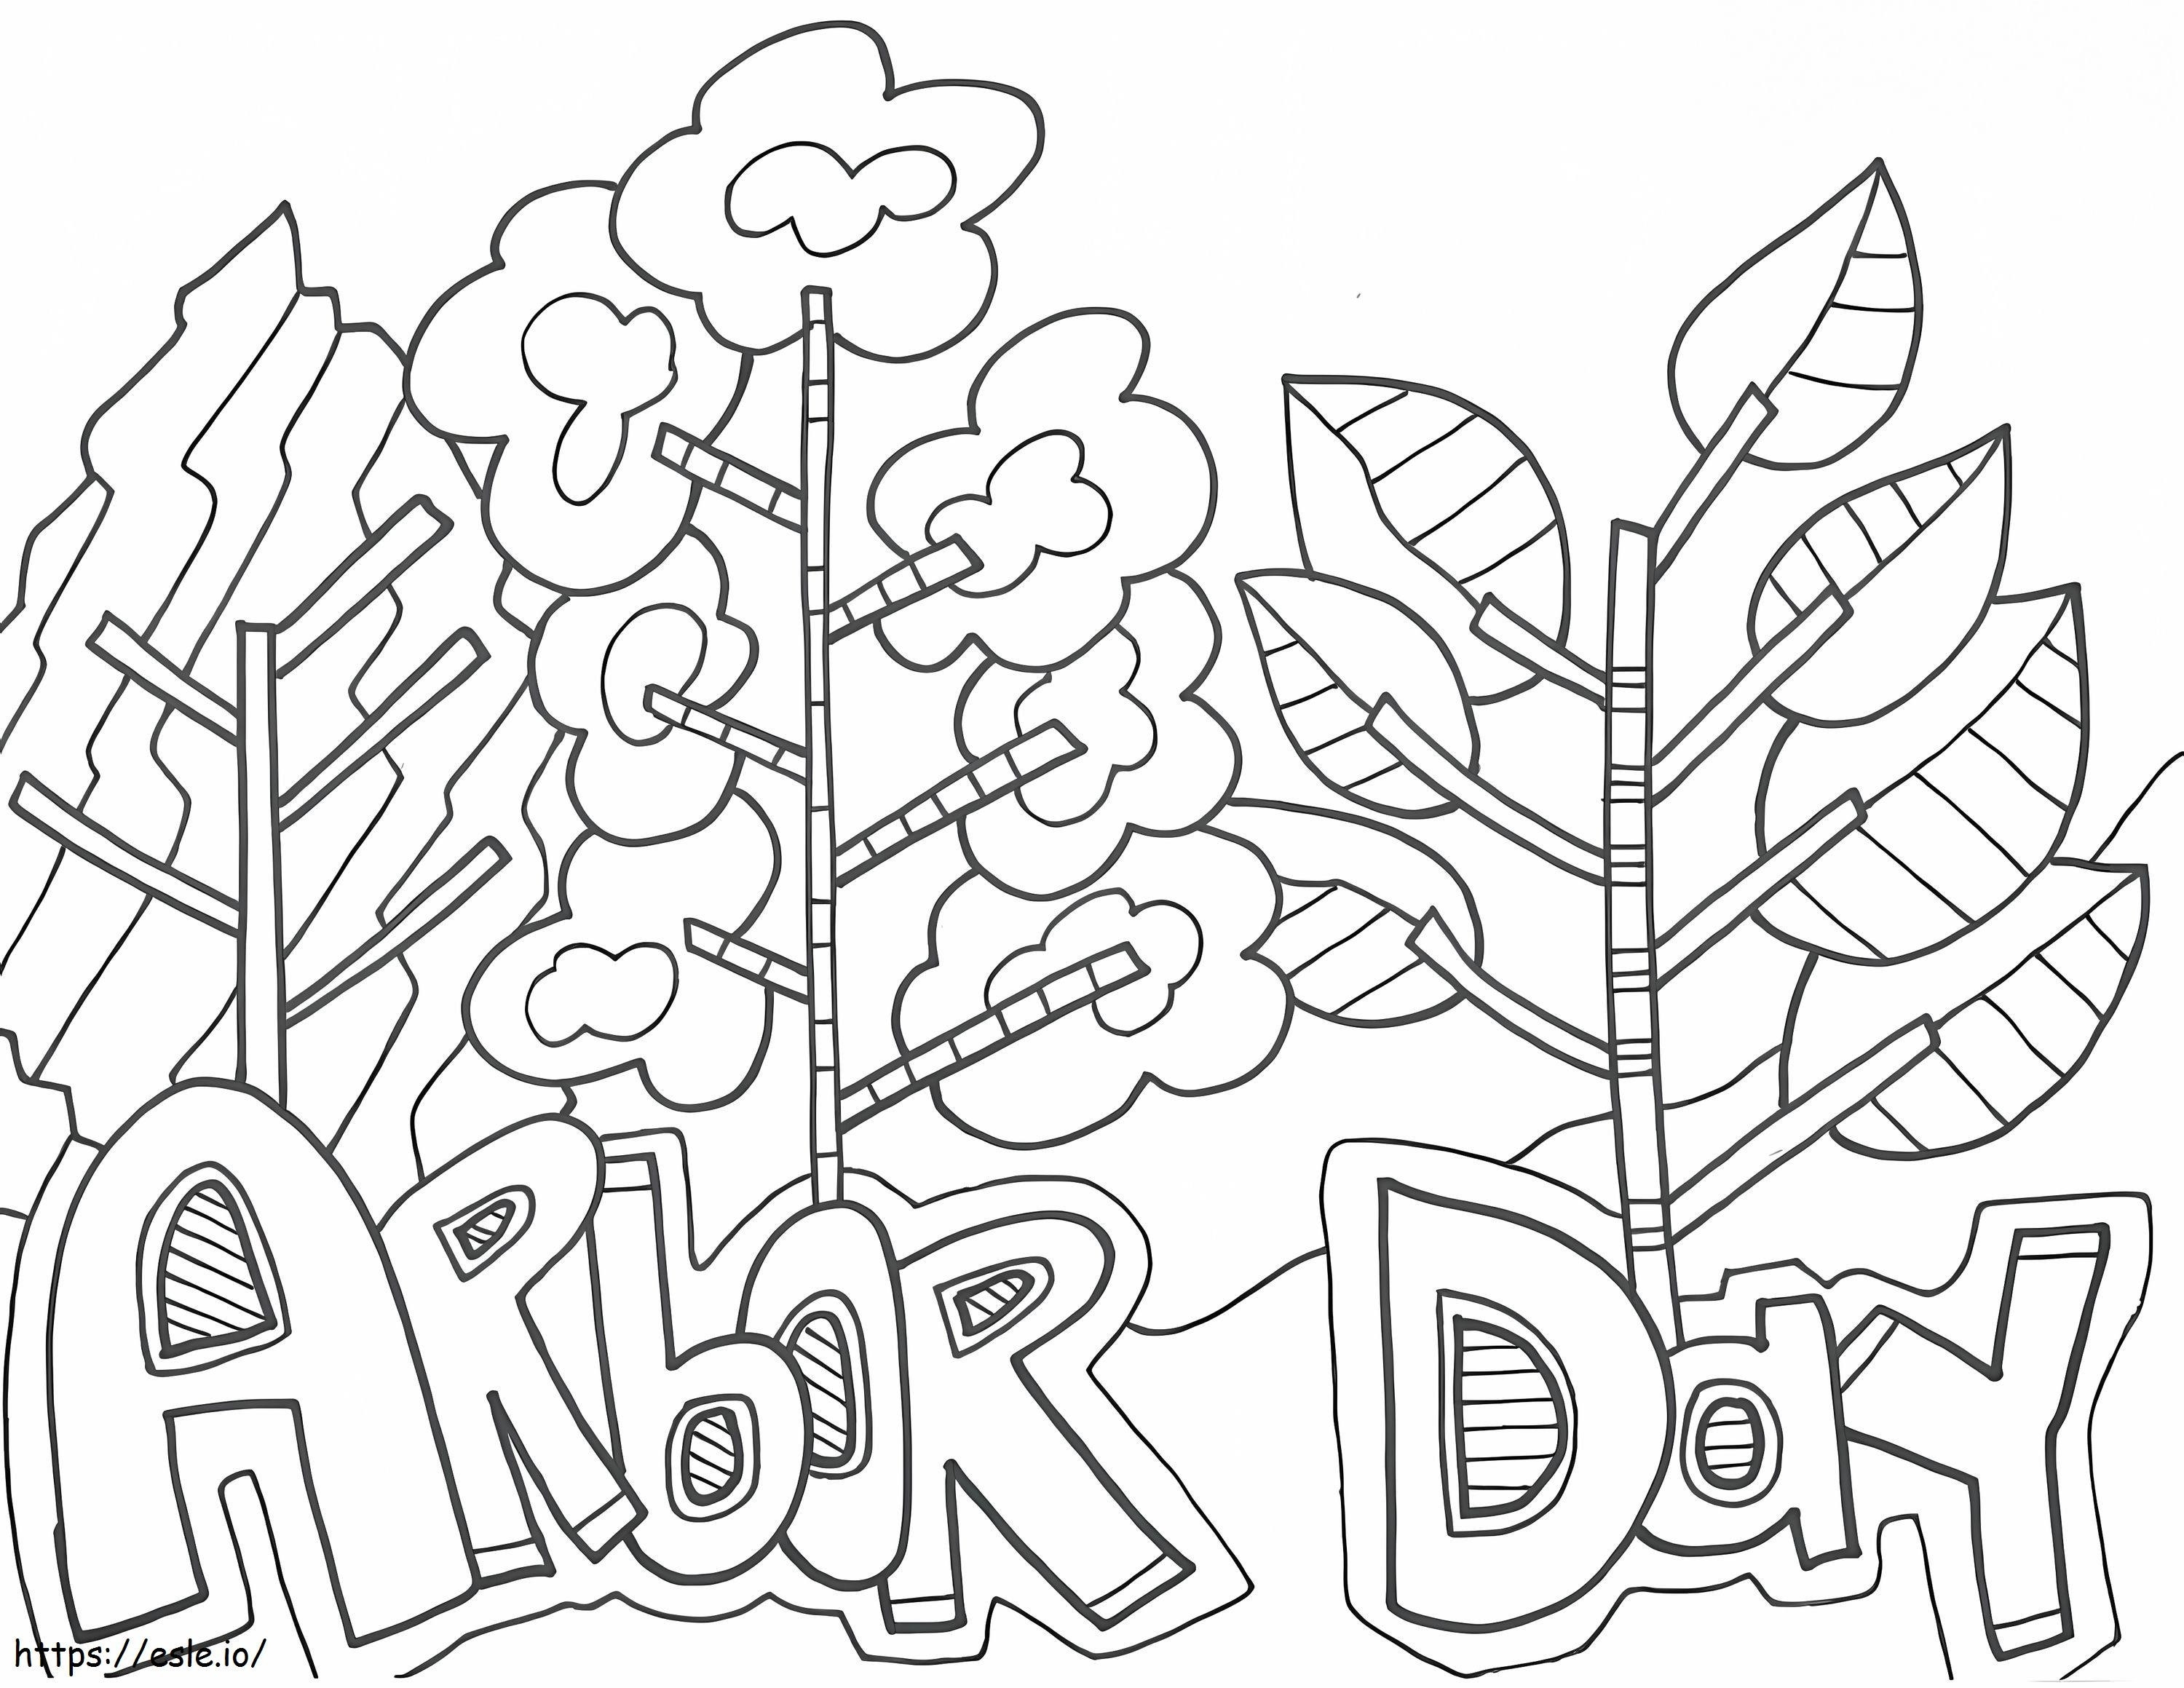 Arbor Day 3 coloring page